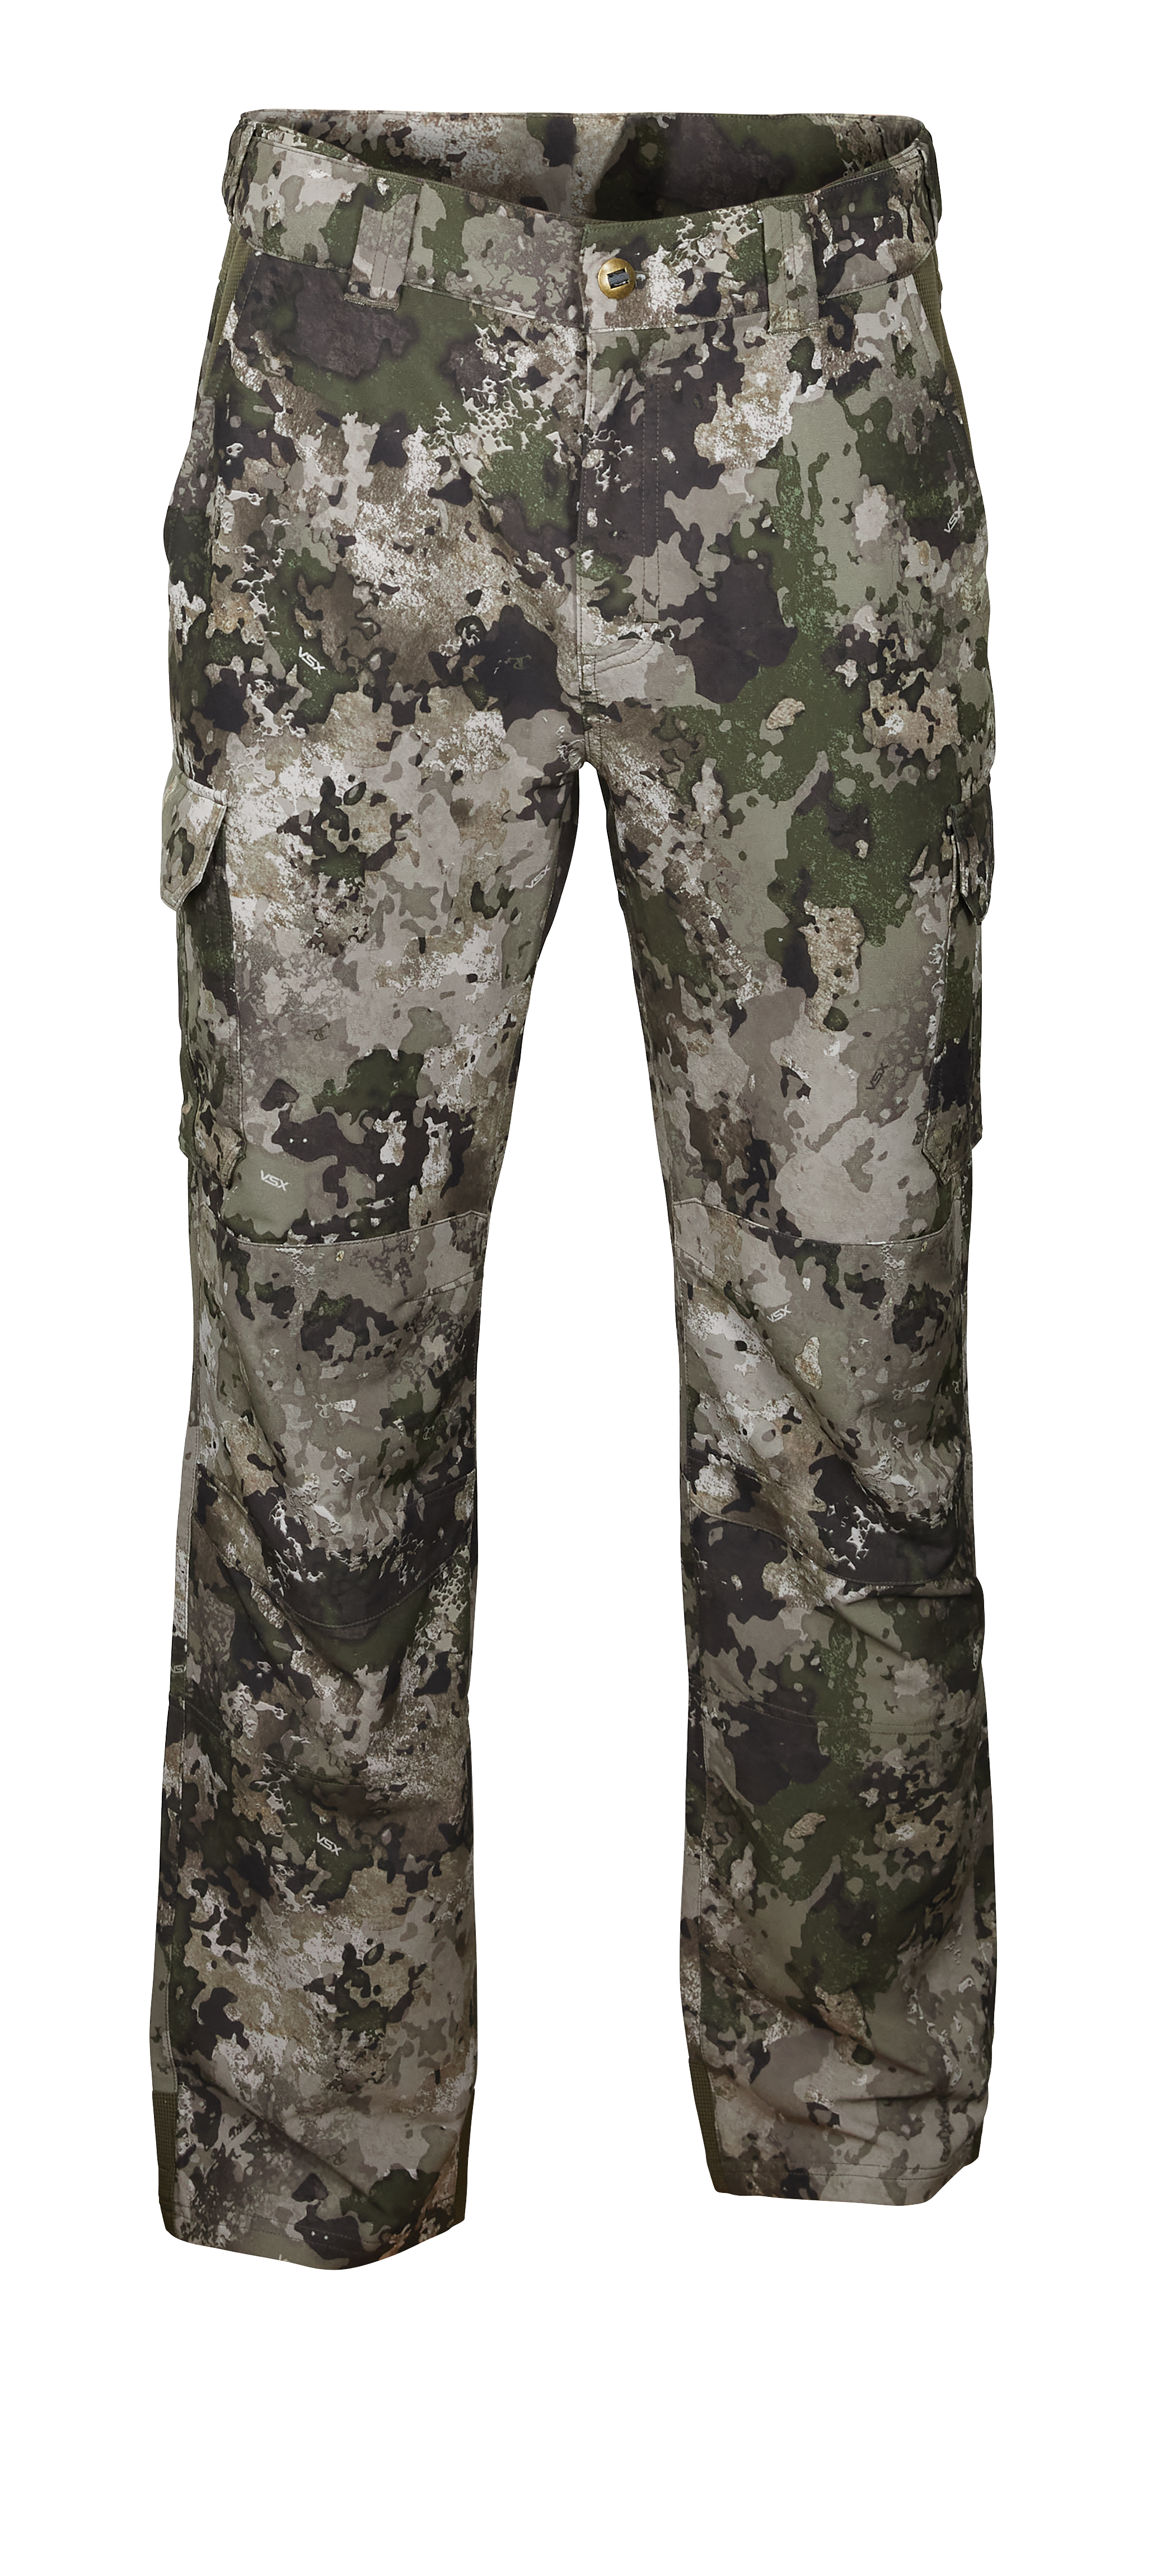 Cabela's Instinct Thermal Zones Pants with 4MOST INHIBIT for Men